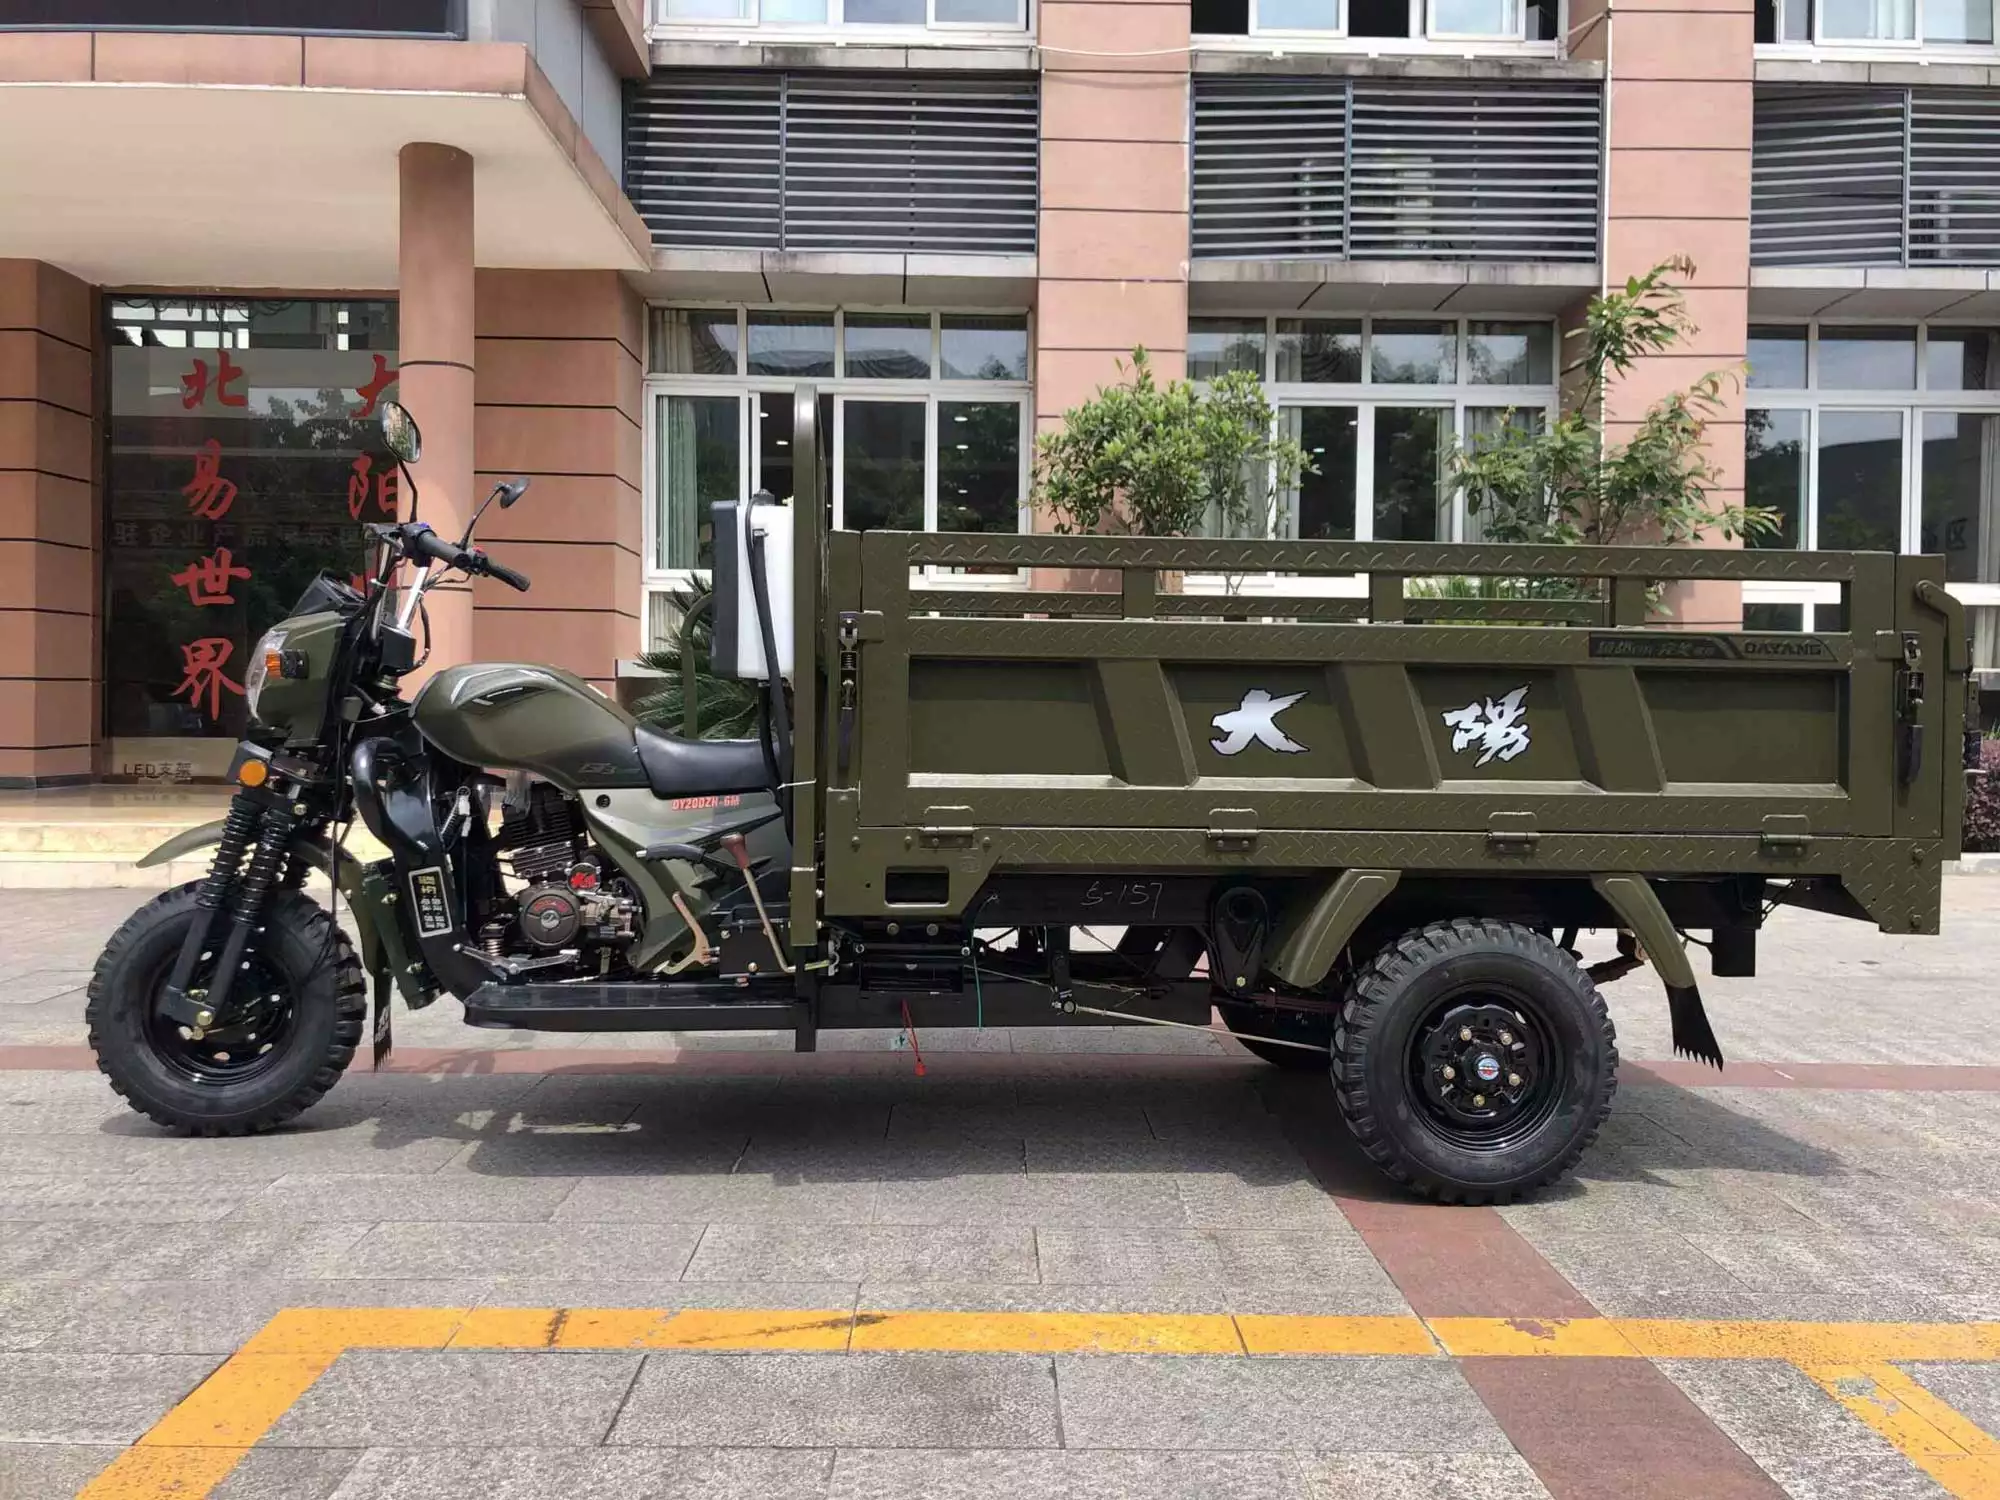 Hot sale adult safe and reliable agricultural morocco trade 150cc loncin engine tricycle cargo gasoil